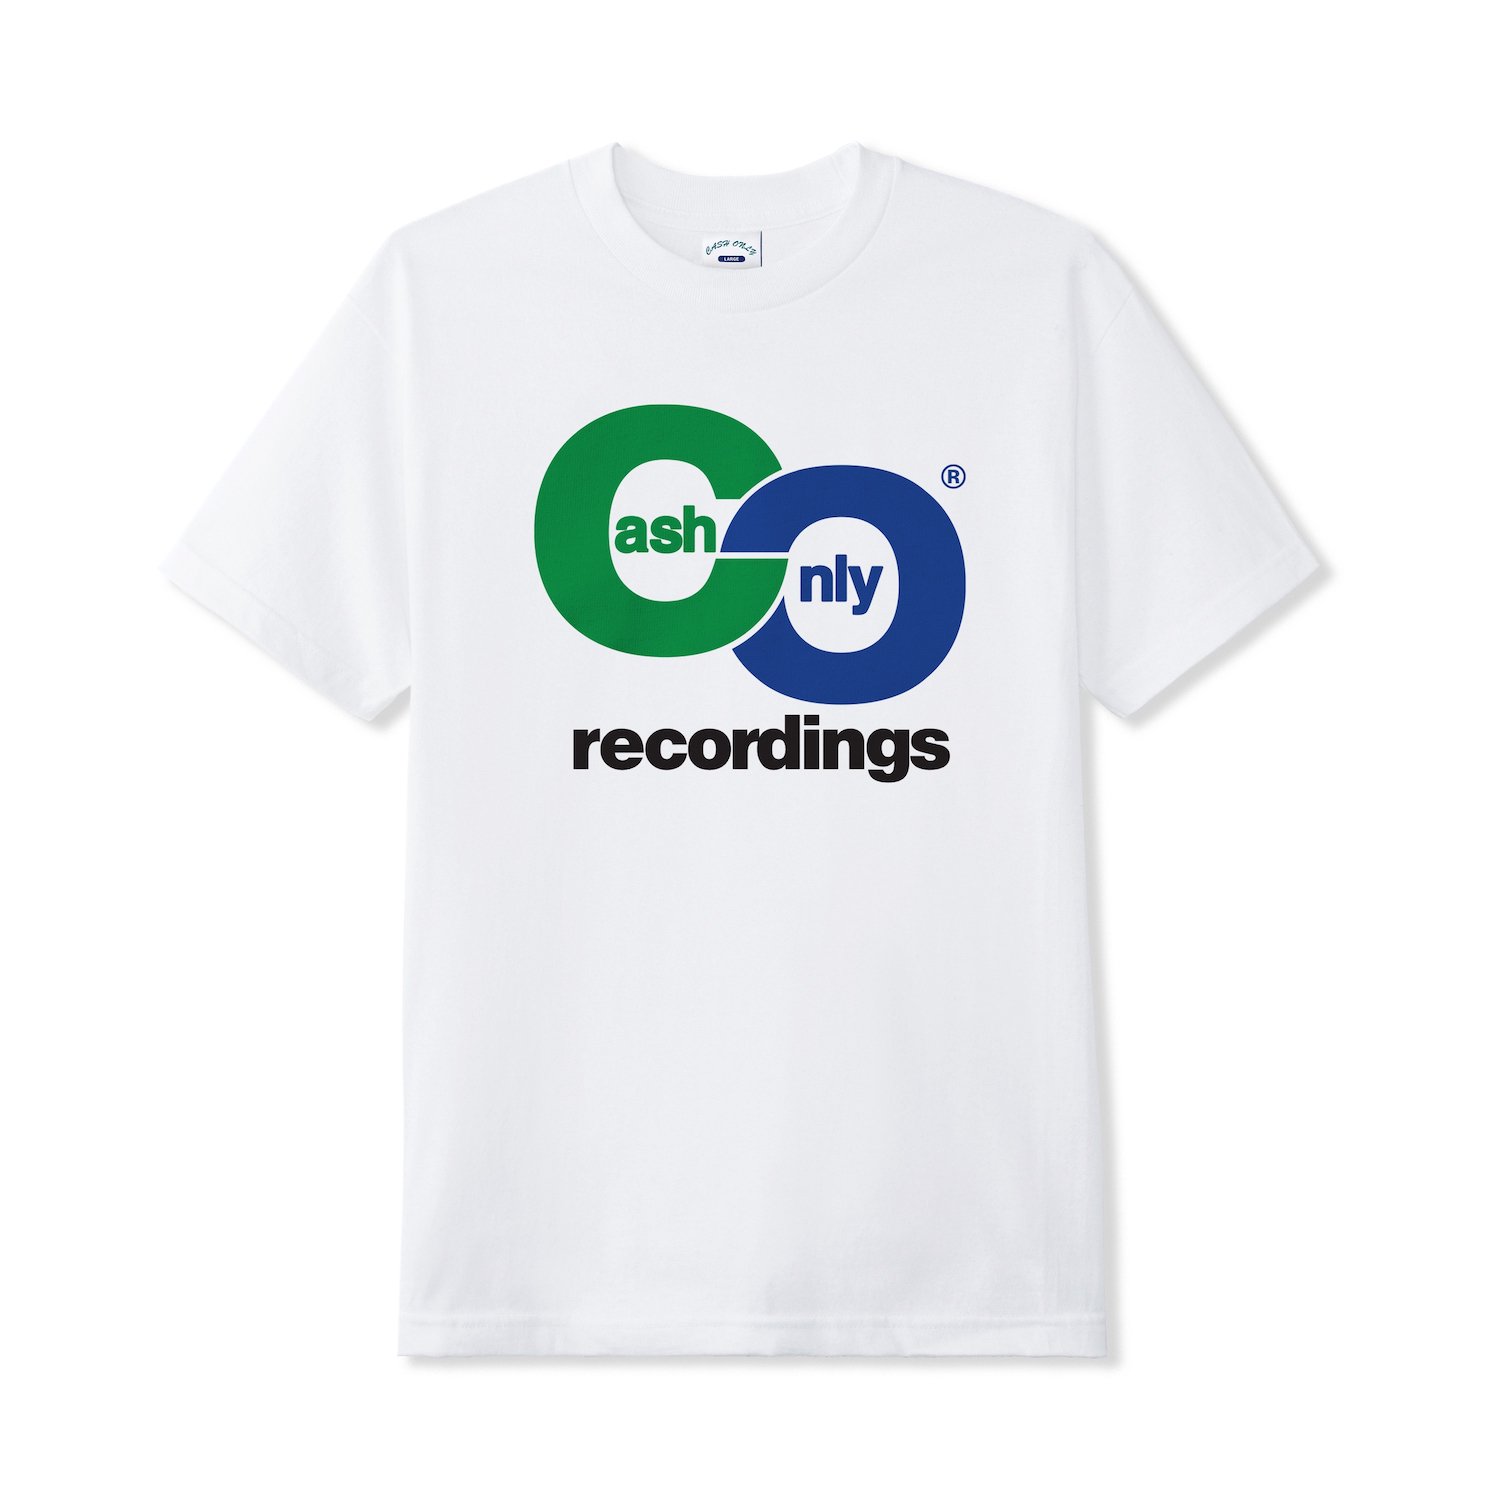 Cash Only<br>Recordings Tee<br>